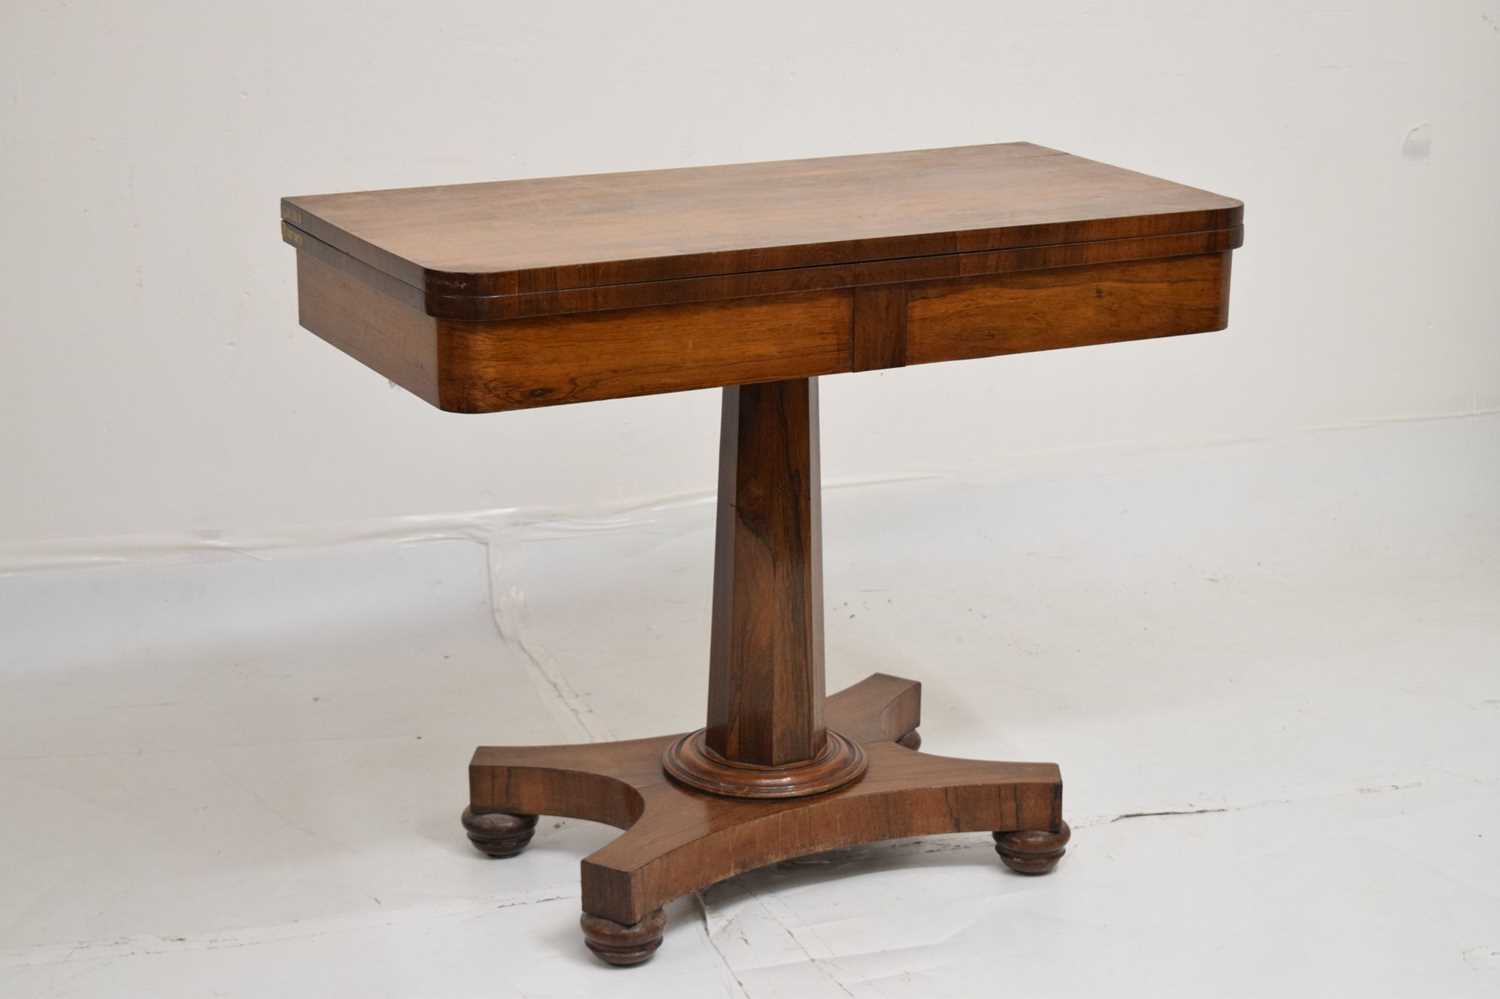 Second quarter 19th century rosewood fold-over pedestal card table - Image 2 of 10